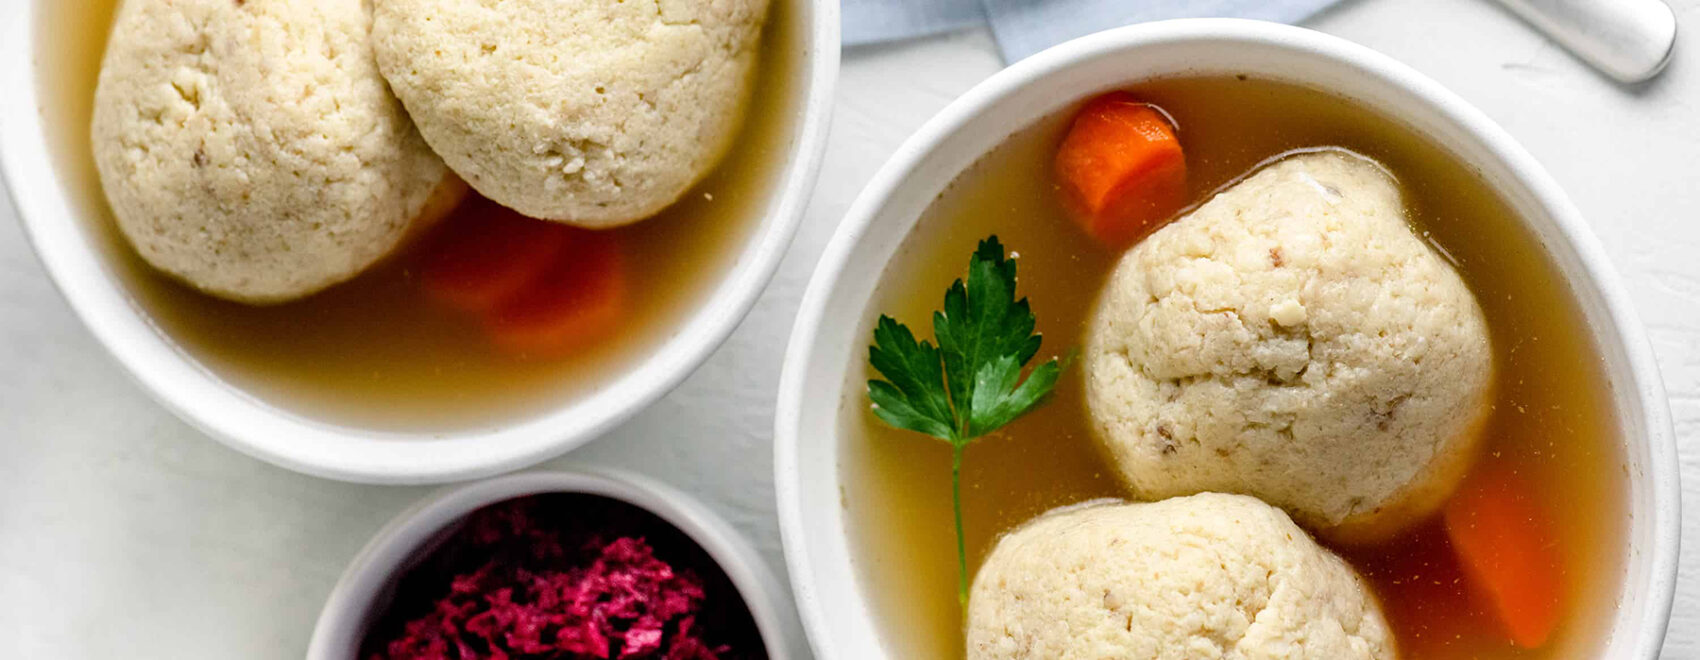 Two white bowls of matzo ball soup in broth with carrots